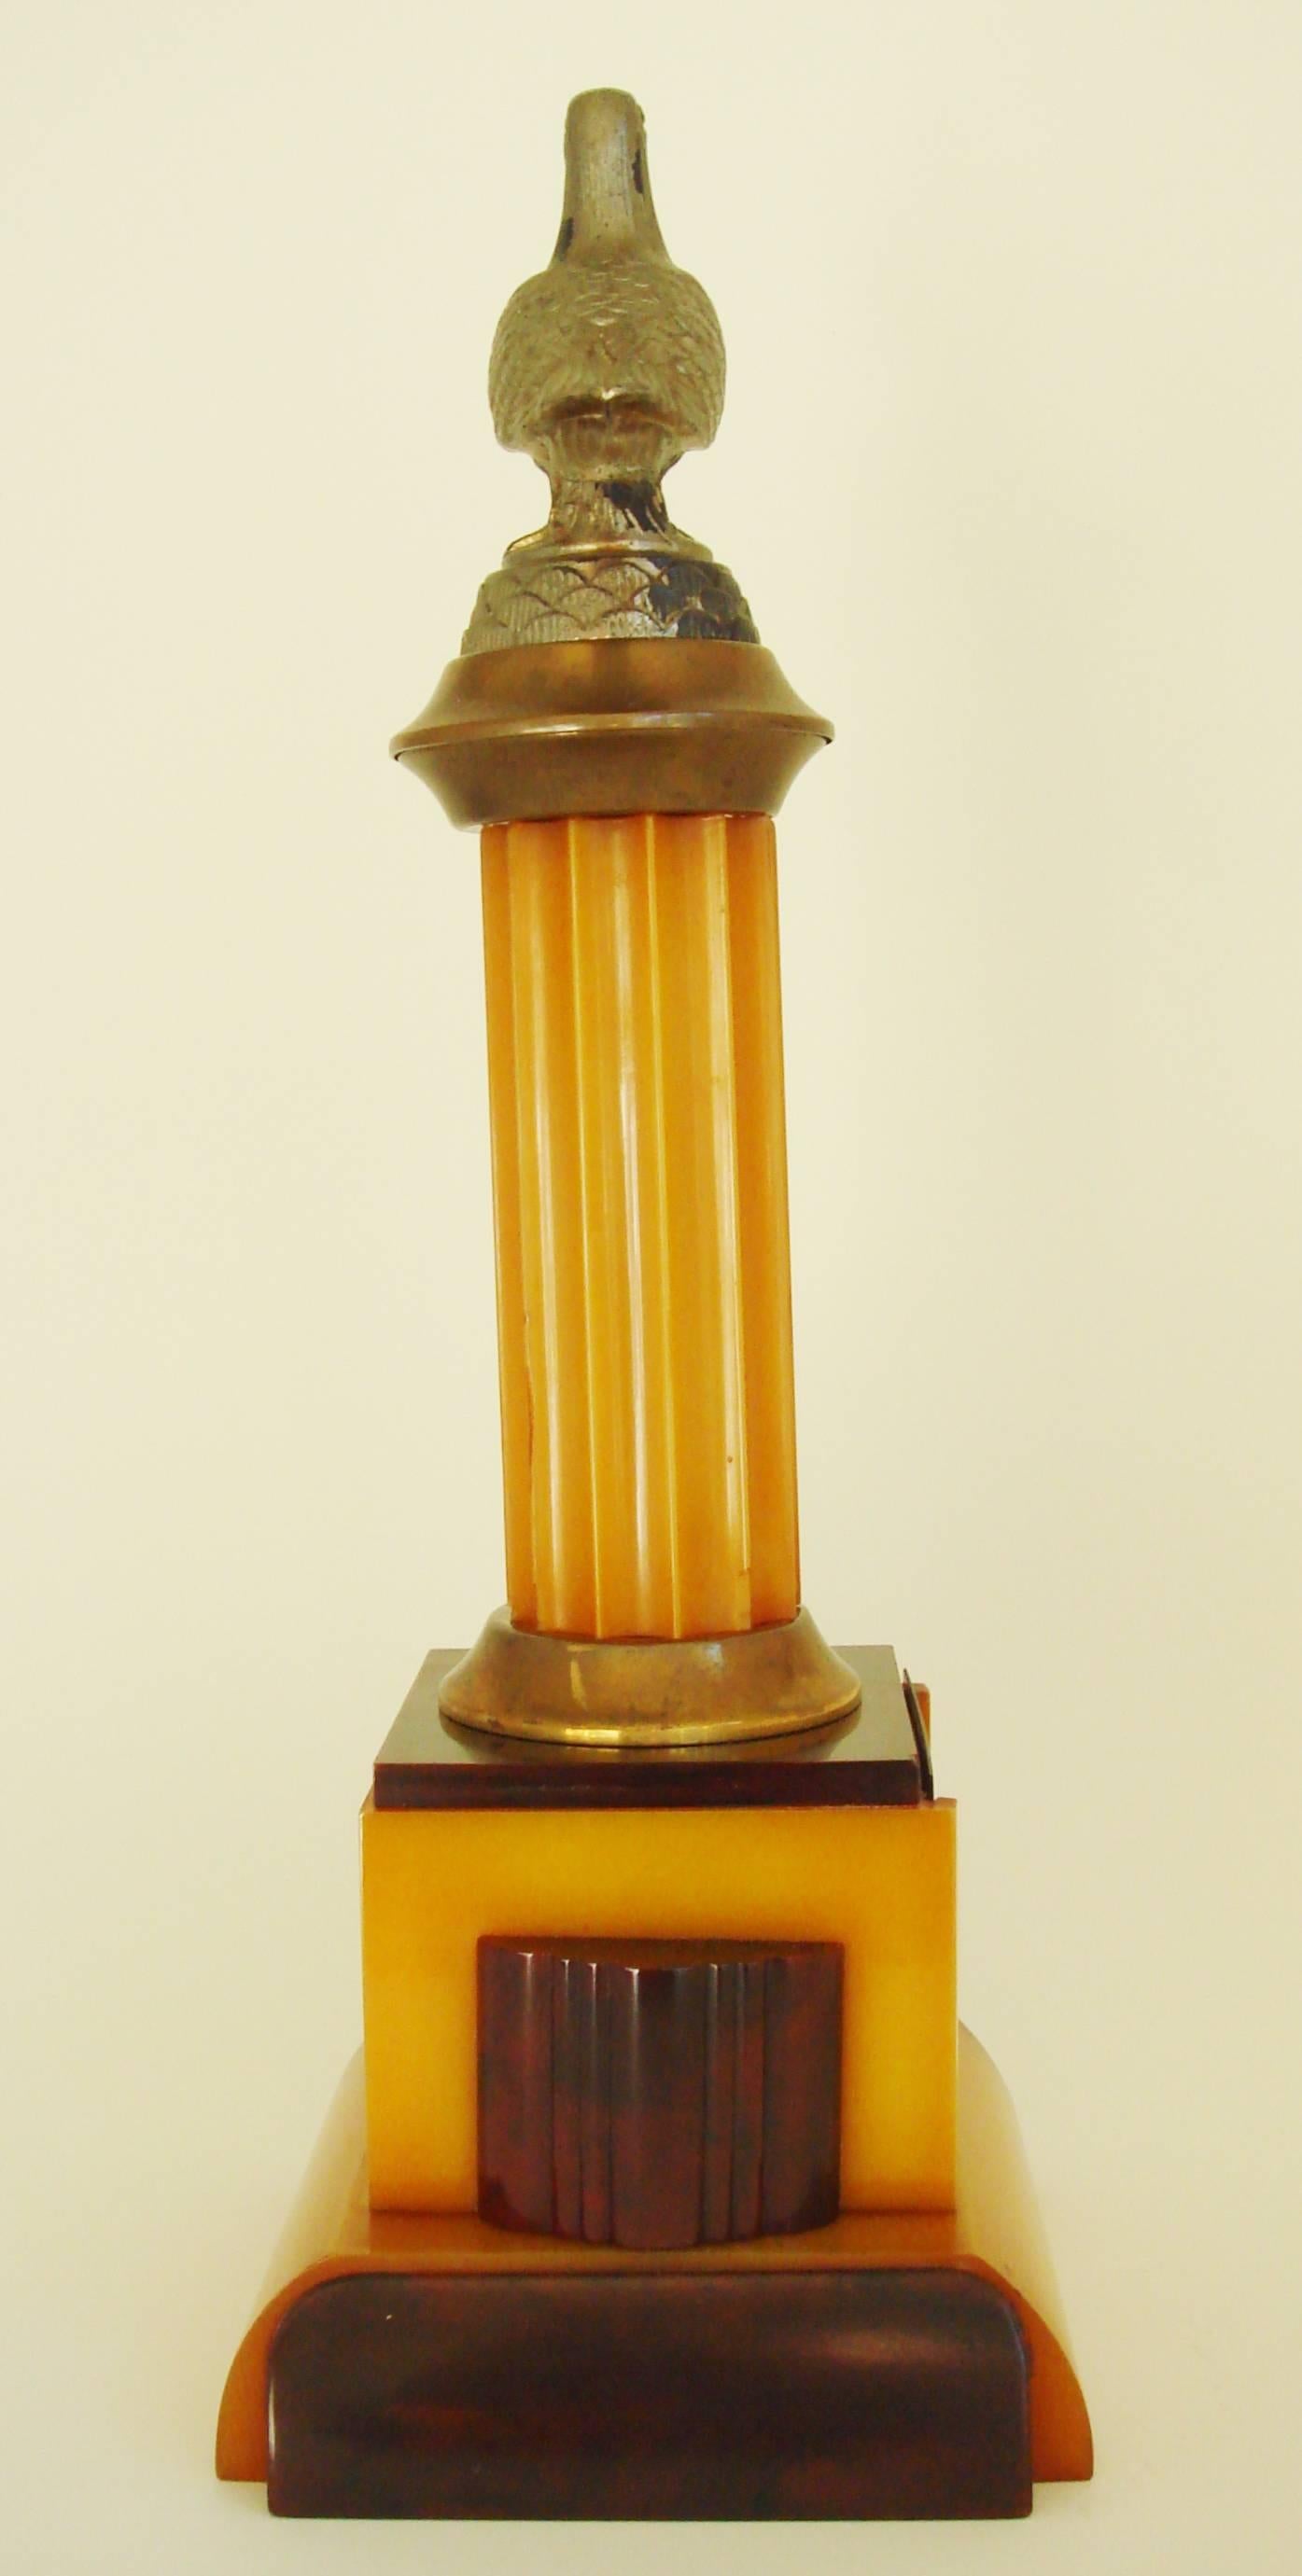 Molded American Art Deco Brass, Amber & Marbled Burgundy Catalin Pigeon Racing Trophy. 